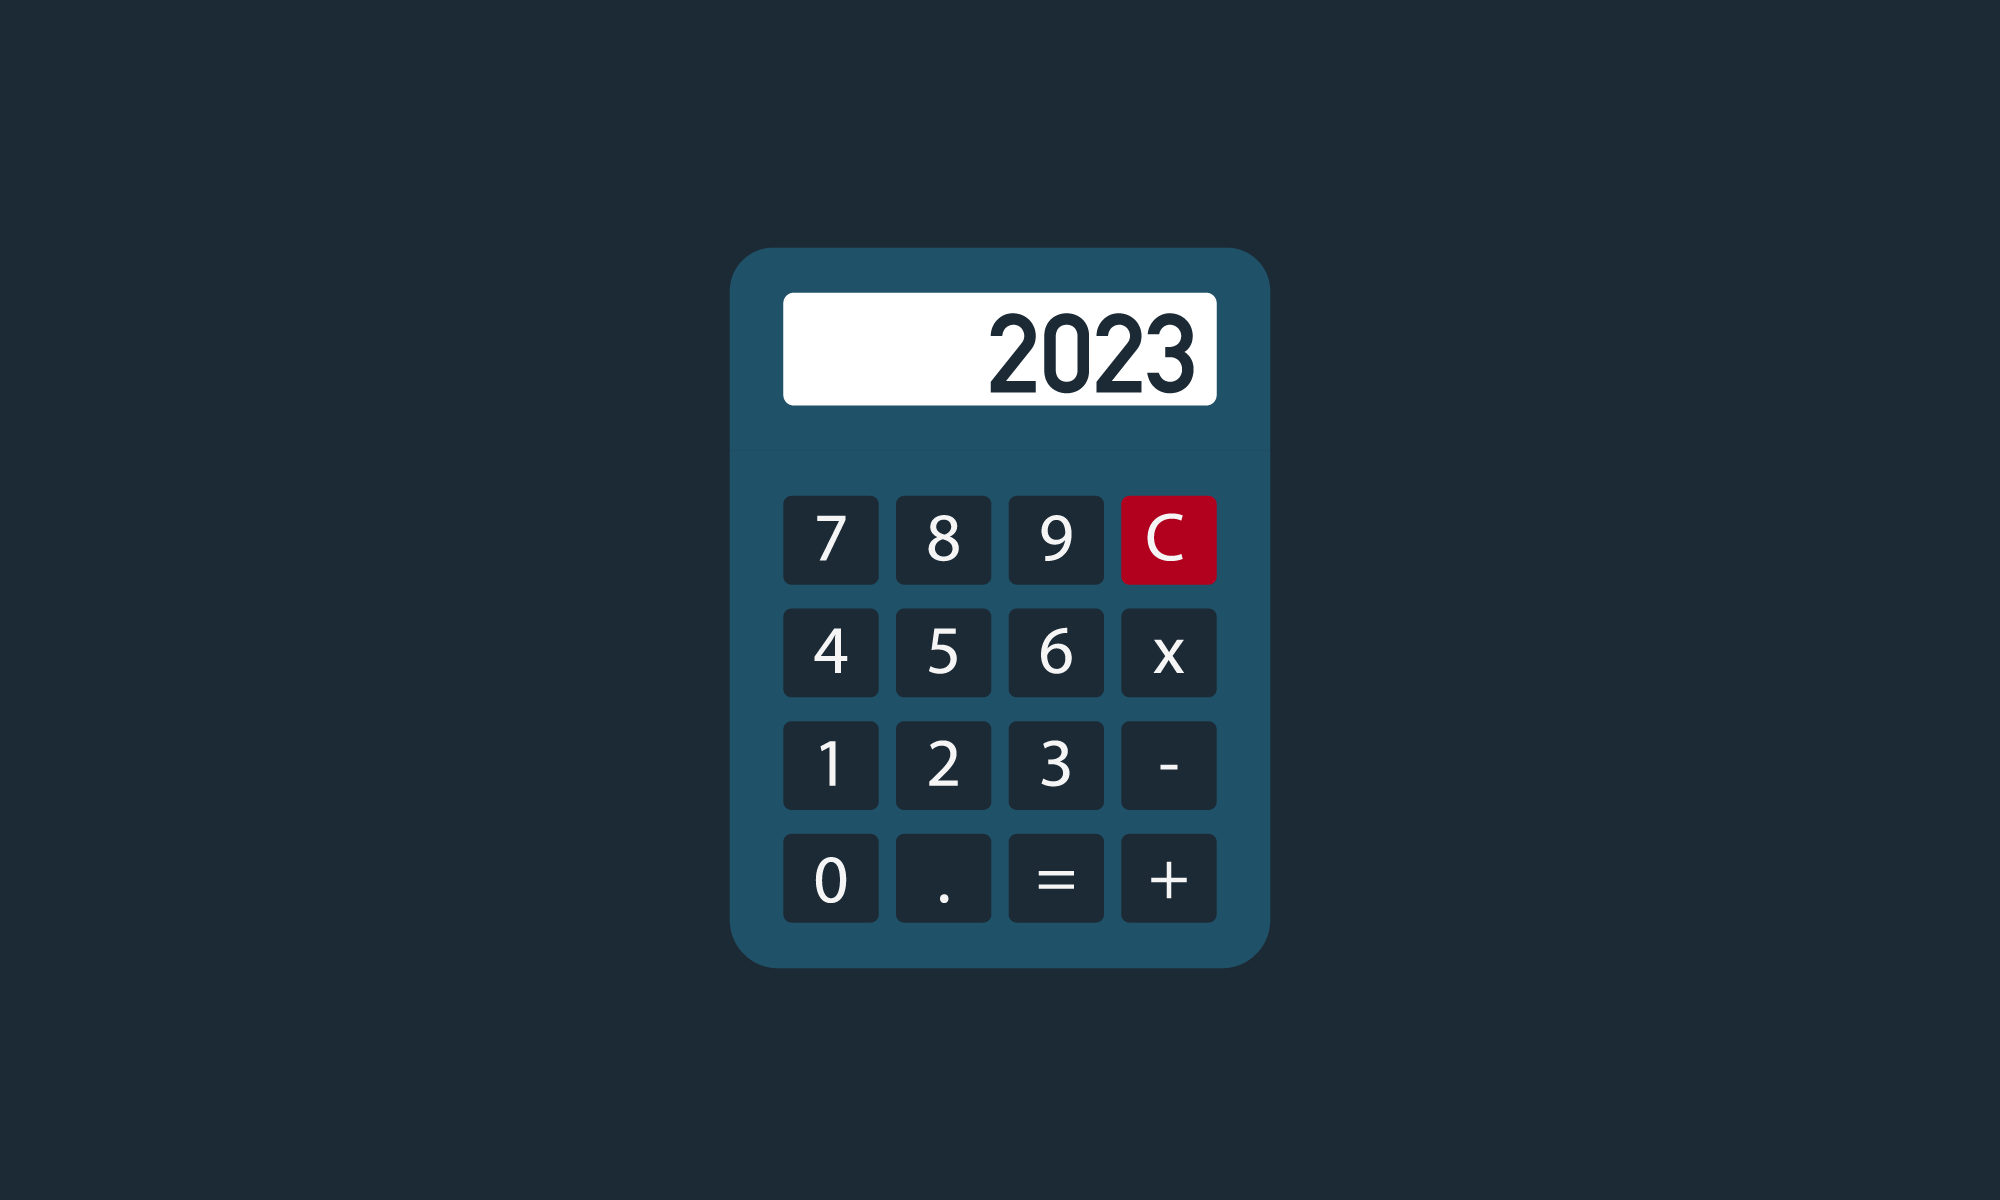 ow to Plan Your 2023 Digital Budget